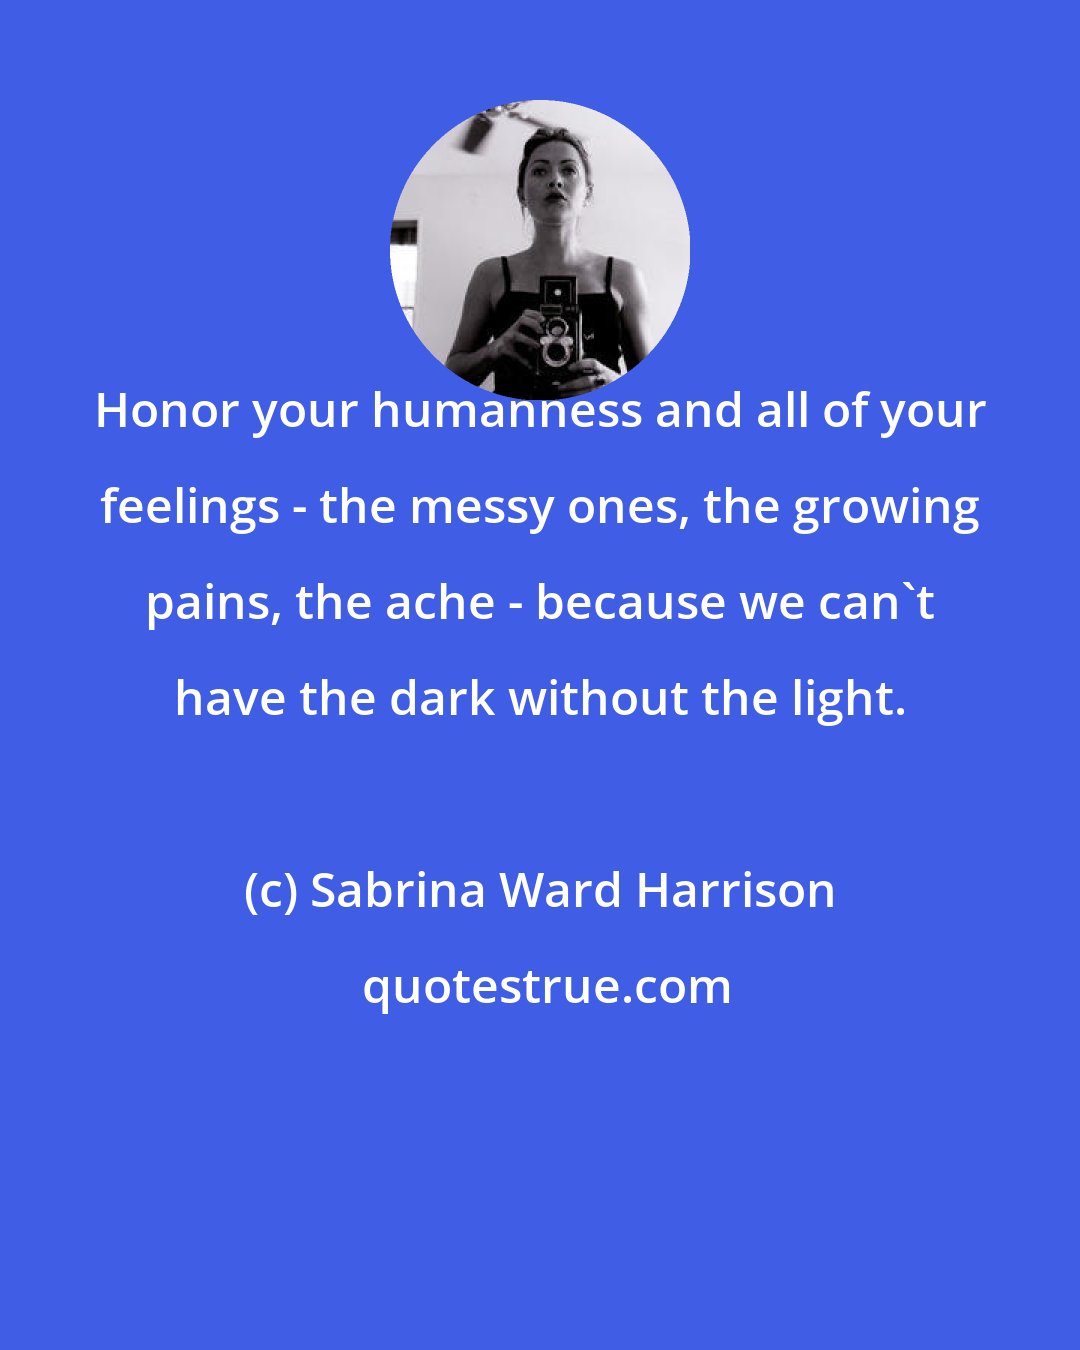 Sabrina Ward Harrison: Honor your humanness and all of your feelings - the messy ones, the growing pains, the ache - because we can't have the dark without the light.